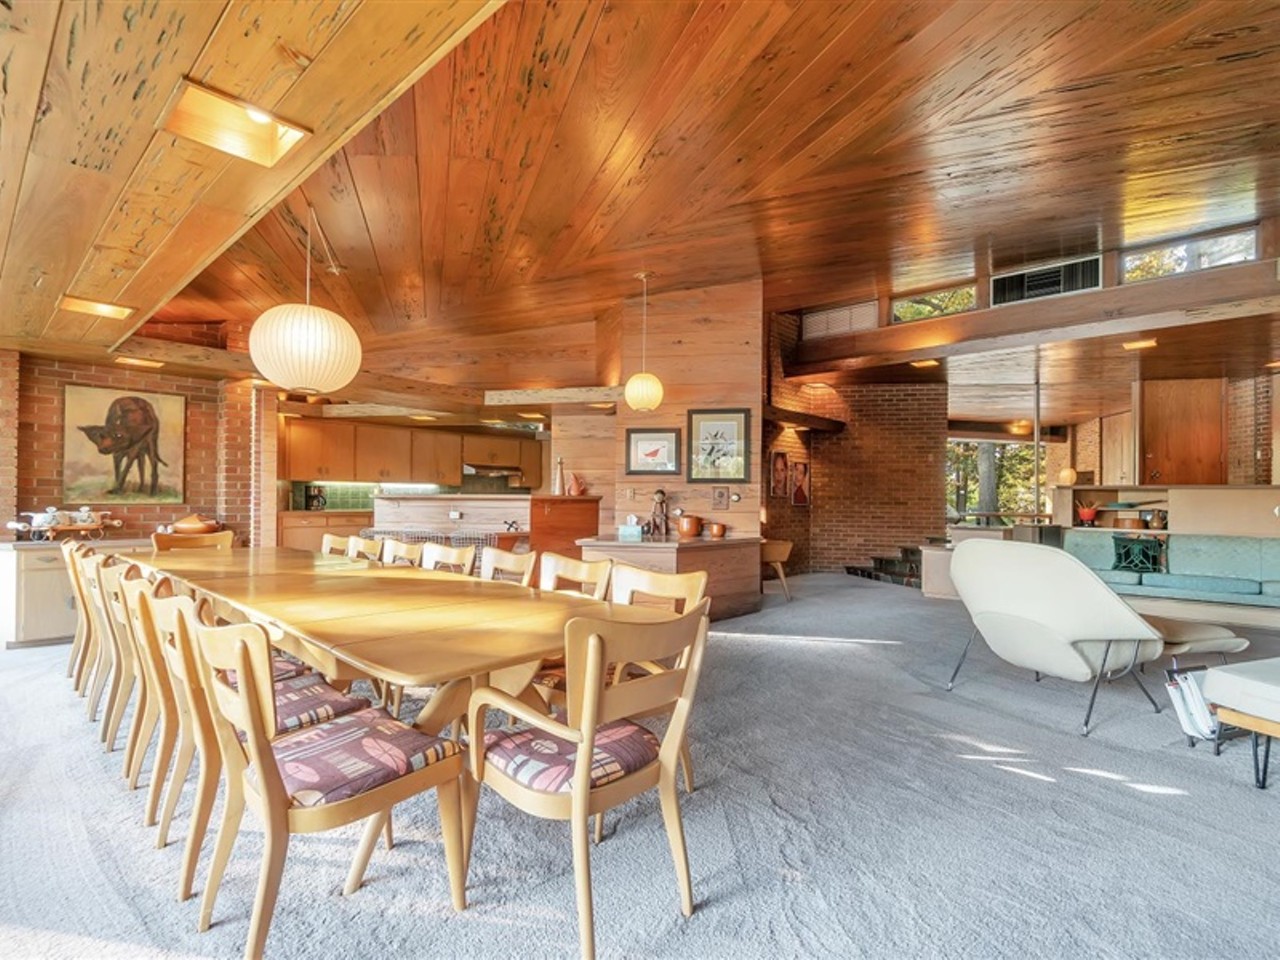 This $499k mid-century home in Grand Blanc was made without right angles &#151;&nbsp;let's take a tour